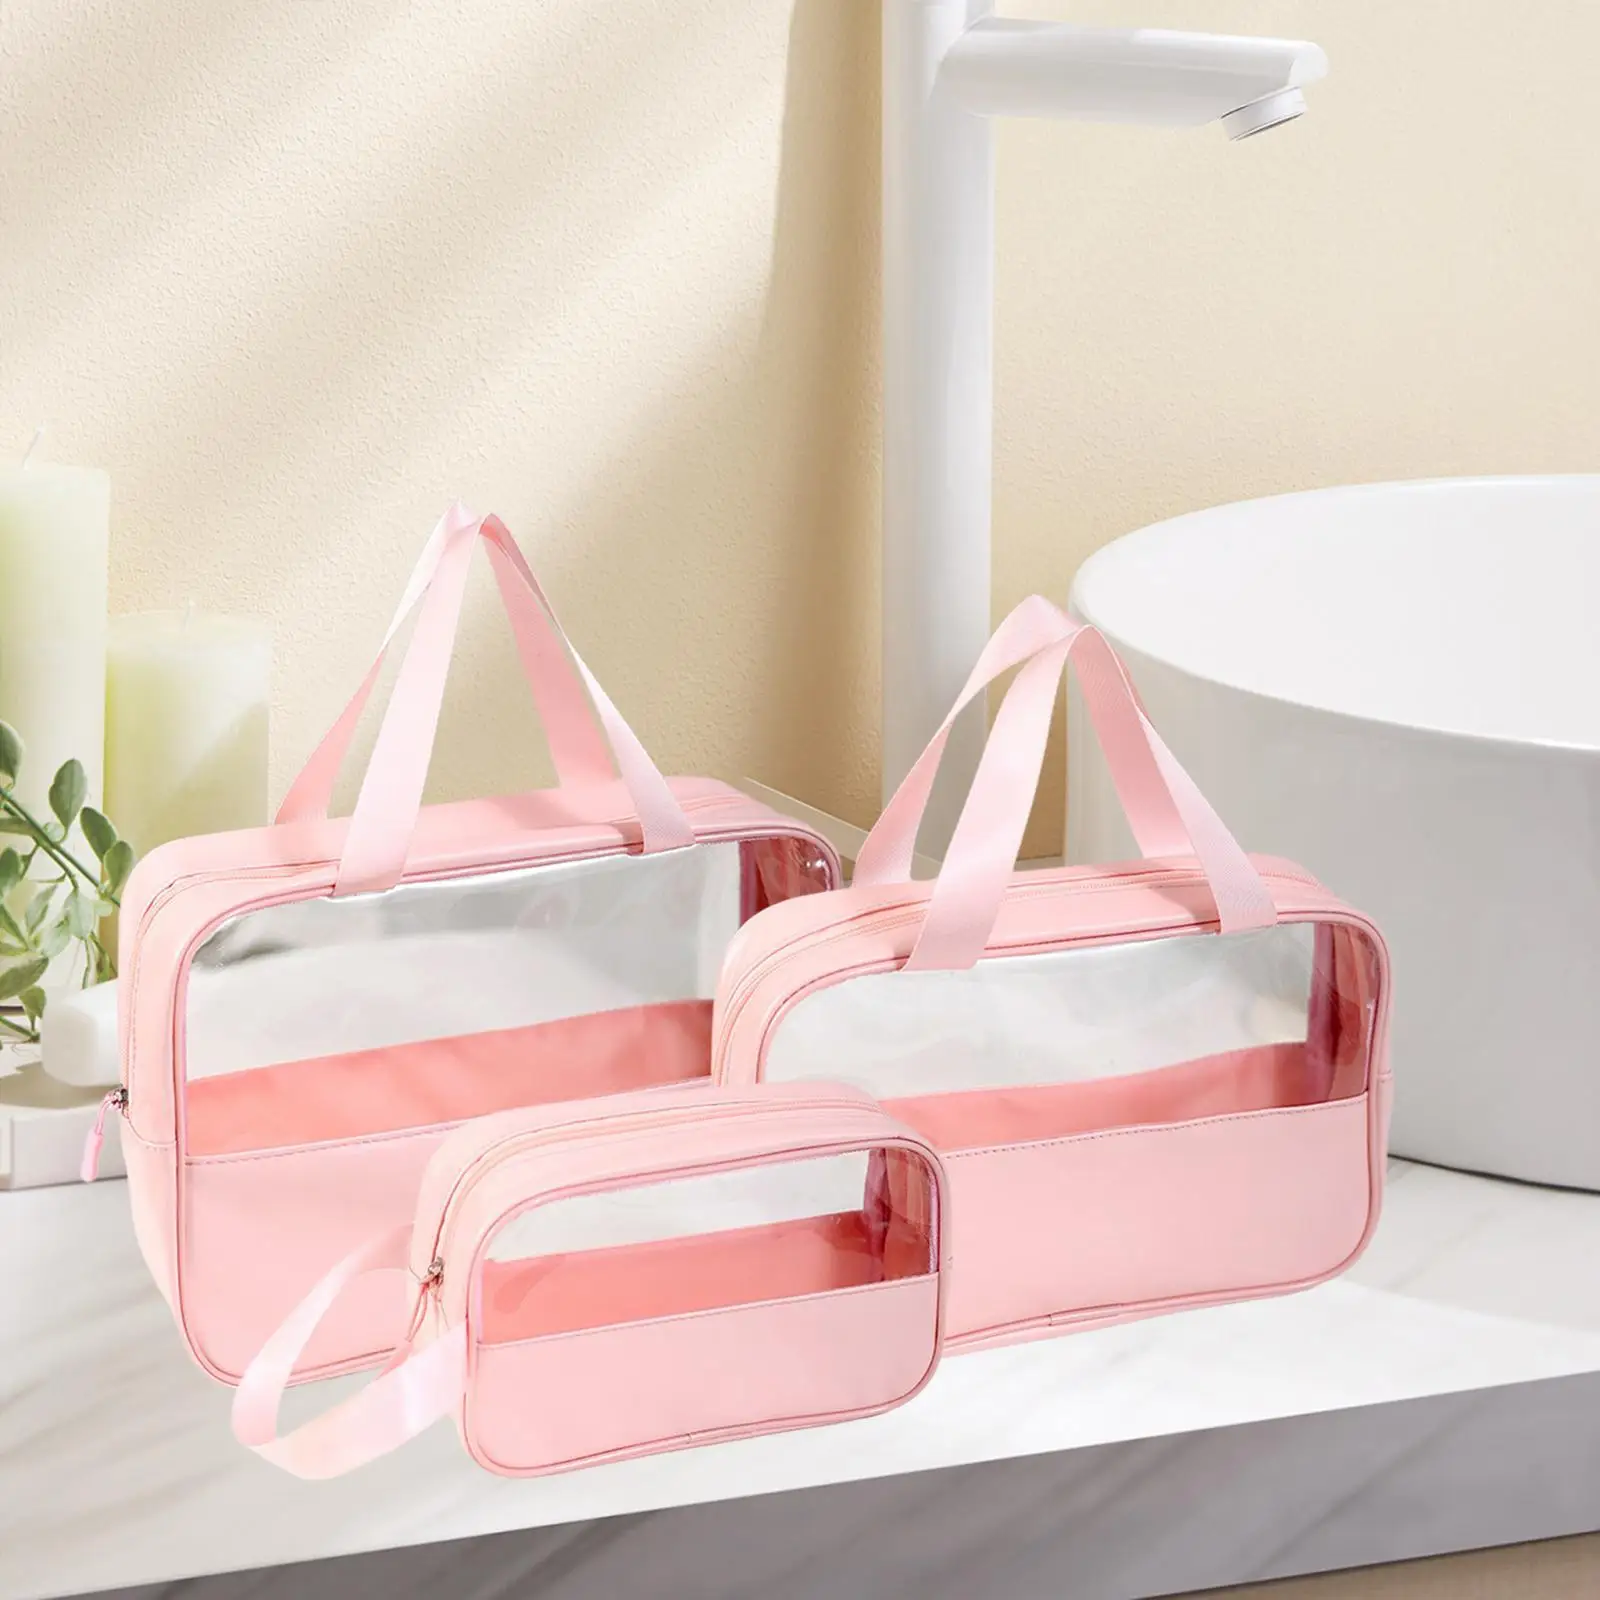 3x Clear Makeup Bag Women Cosmetic Bag Multifunction Cosmetic Organizer Clear Travel Bags for Toiletries Toiletry Bag Bag